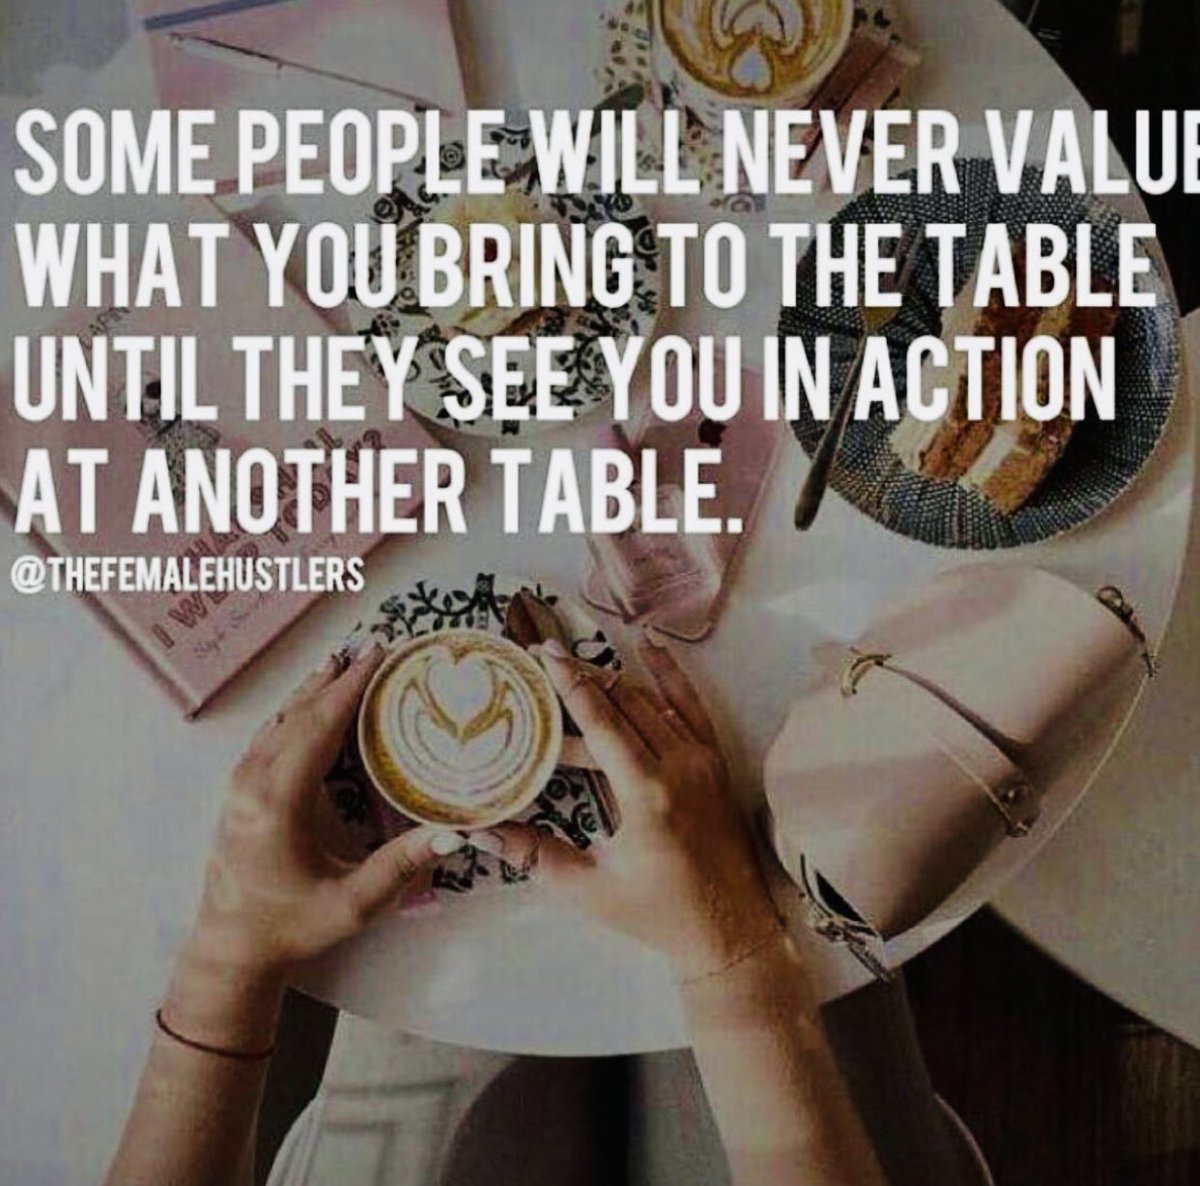 Always remember your worth you bring to the table..🙌🔥👊
#PRSNTS #Networkingtip
#value #worth #creditability #trust #business #yourworth #time #networking #entrepreneurs #businesstips #GlobalEntrepreneurs #expertise #knowledge #mentor #prsnts